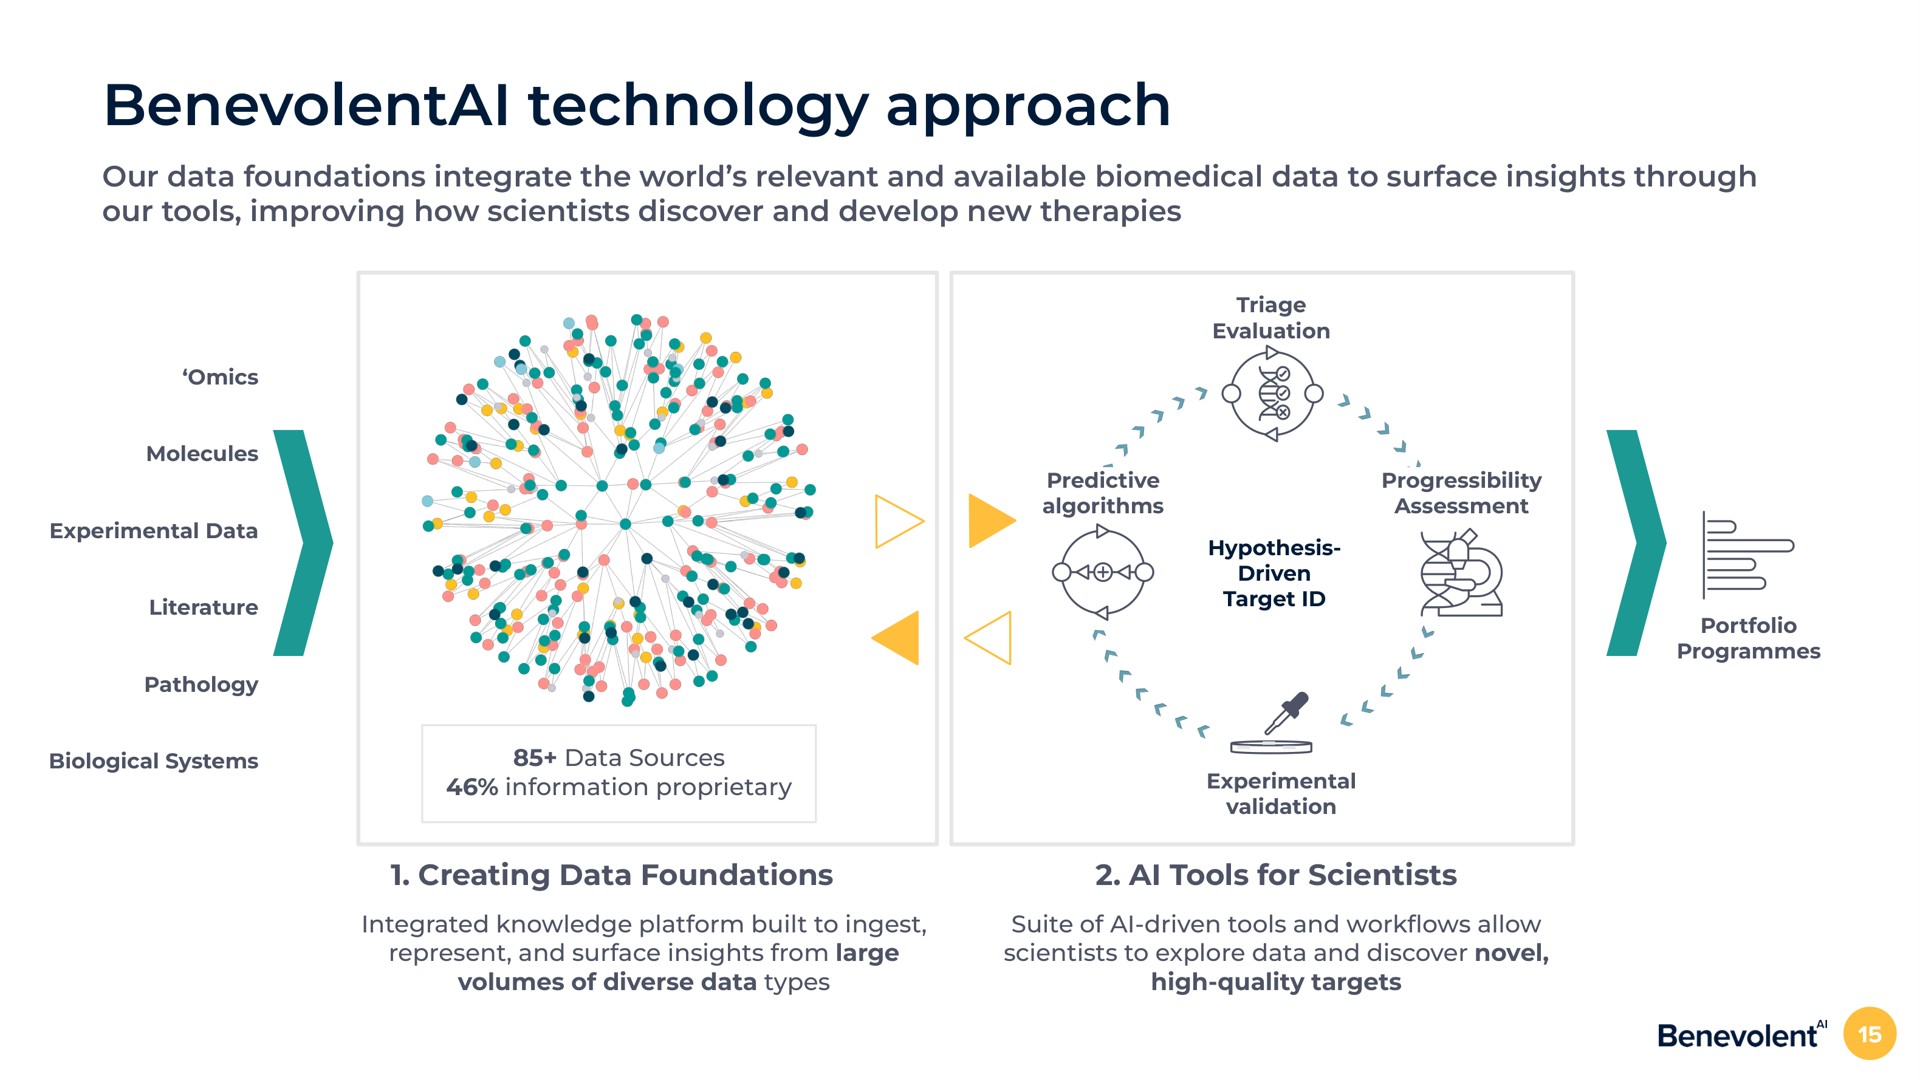 technology approach our data foundations integrate the world relevant and available data to surface insights through our tools improving how scientists discover and develop new therapies creating data foundations tools for scientists | BenevolentAI